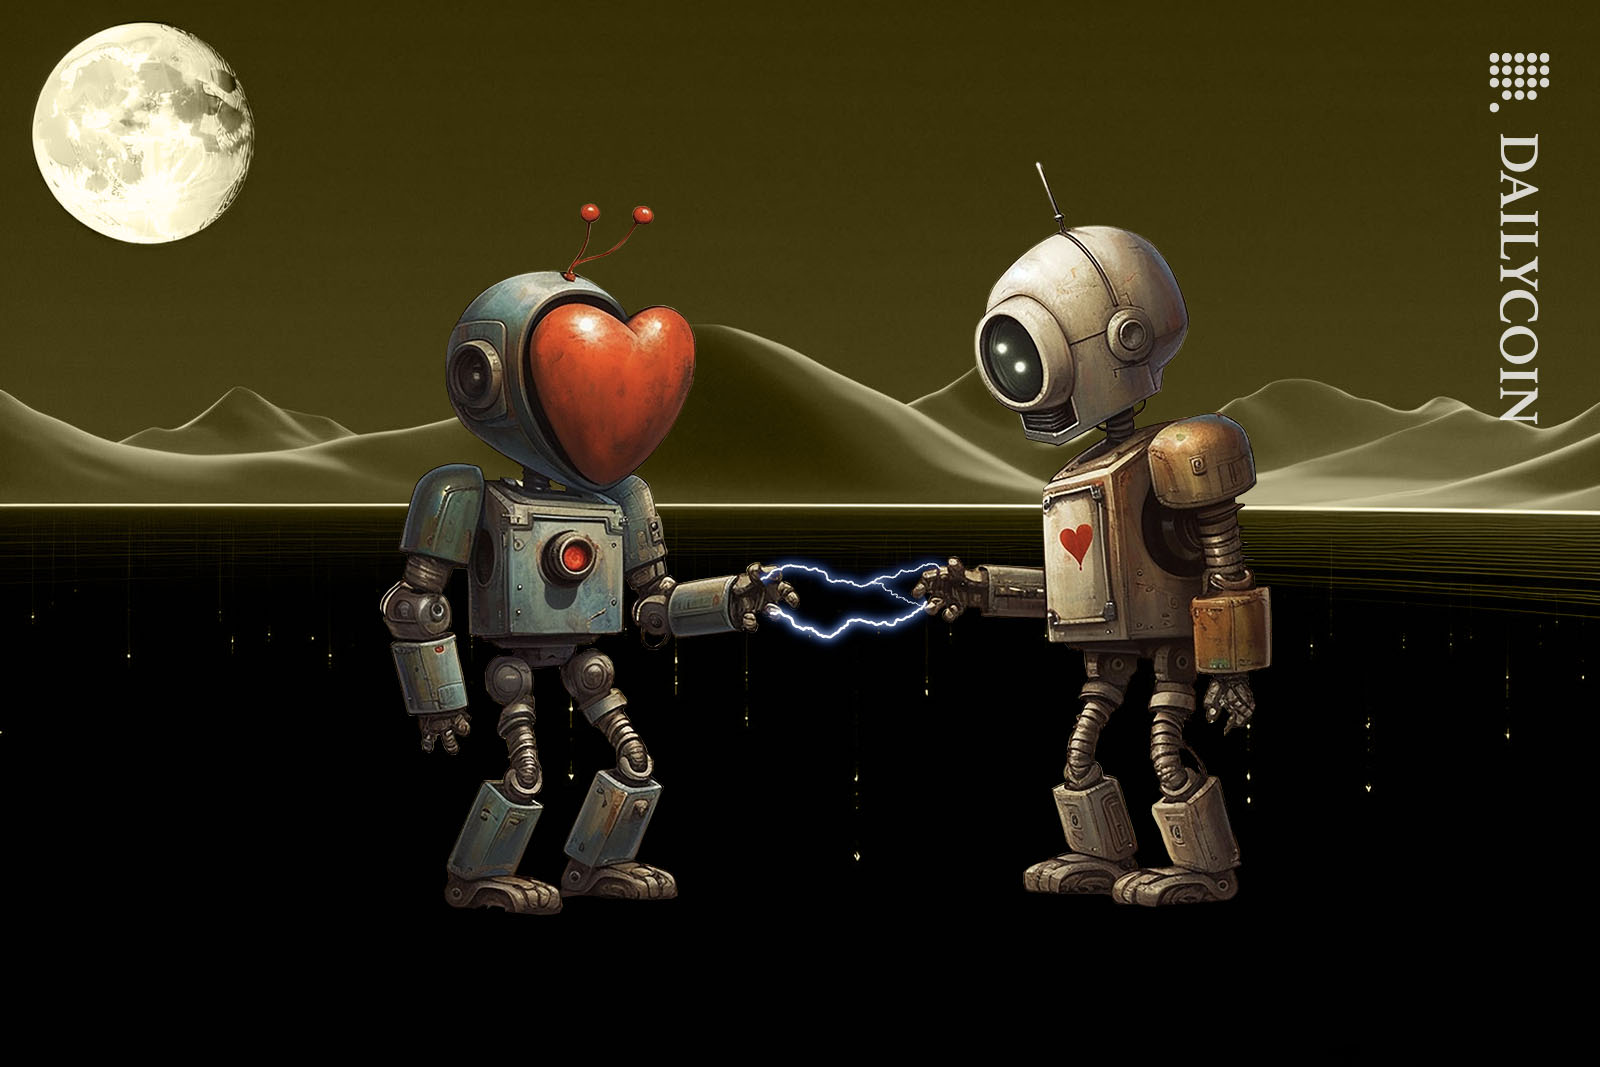 Two cute robots getting to know eachother in a wierd cartoonish environment.